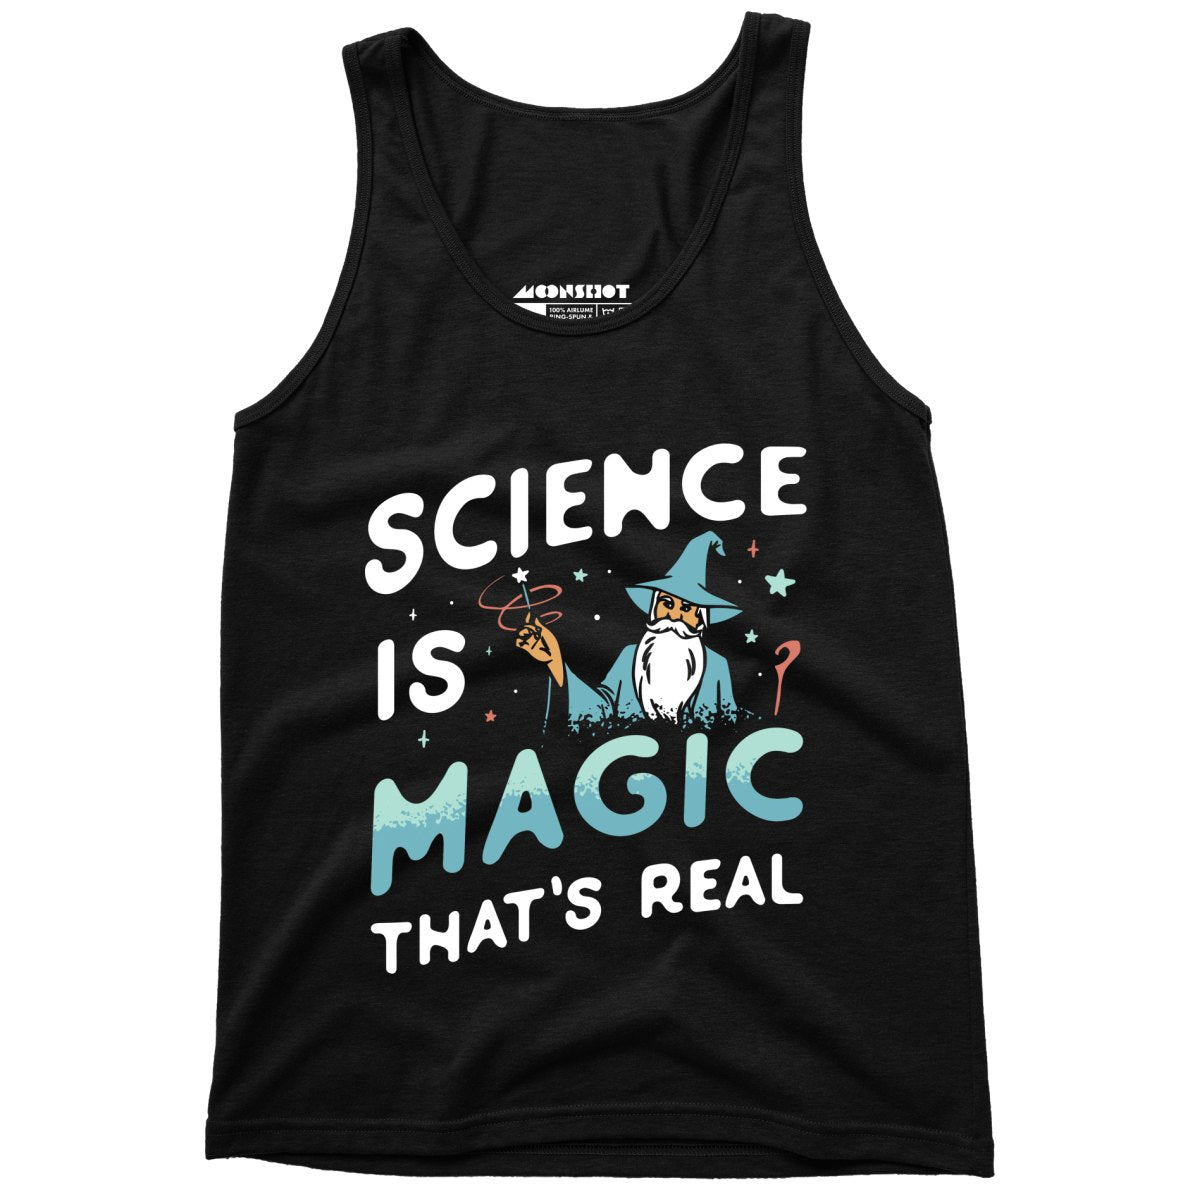 Science is Magic That's Real - Unisex Tank Top